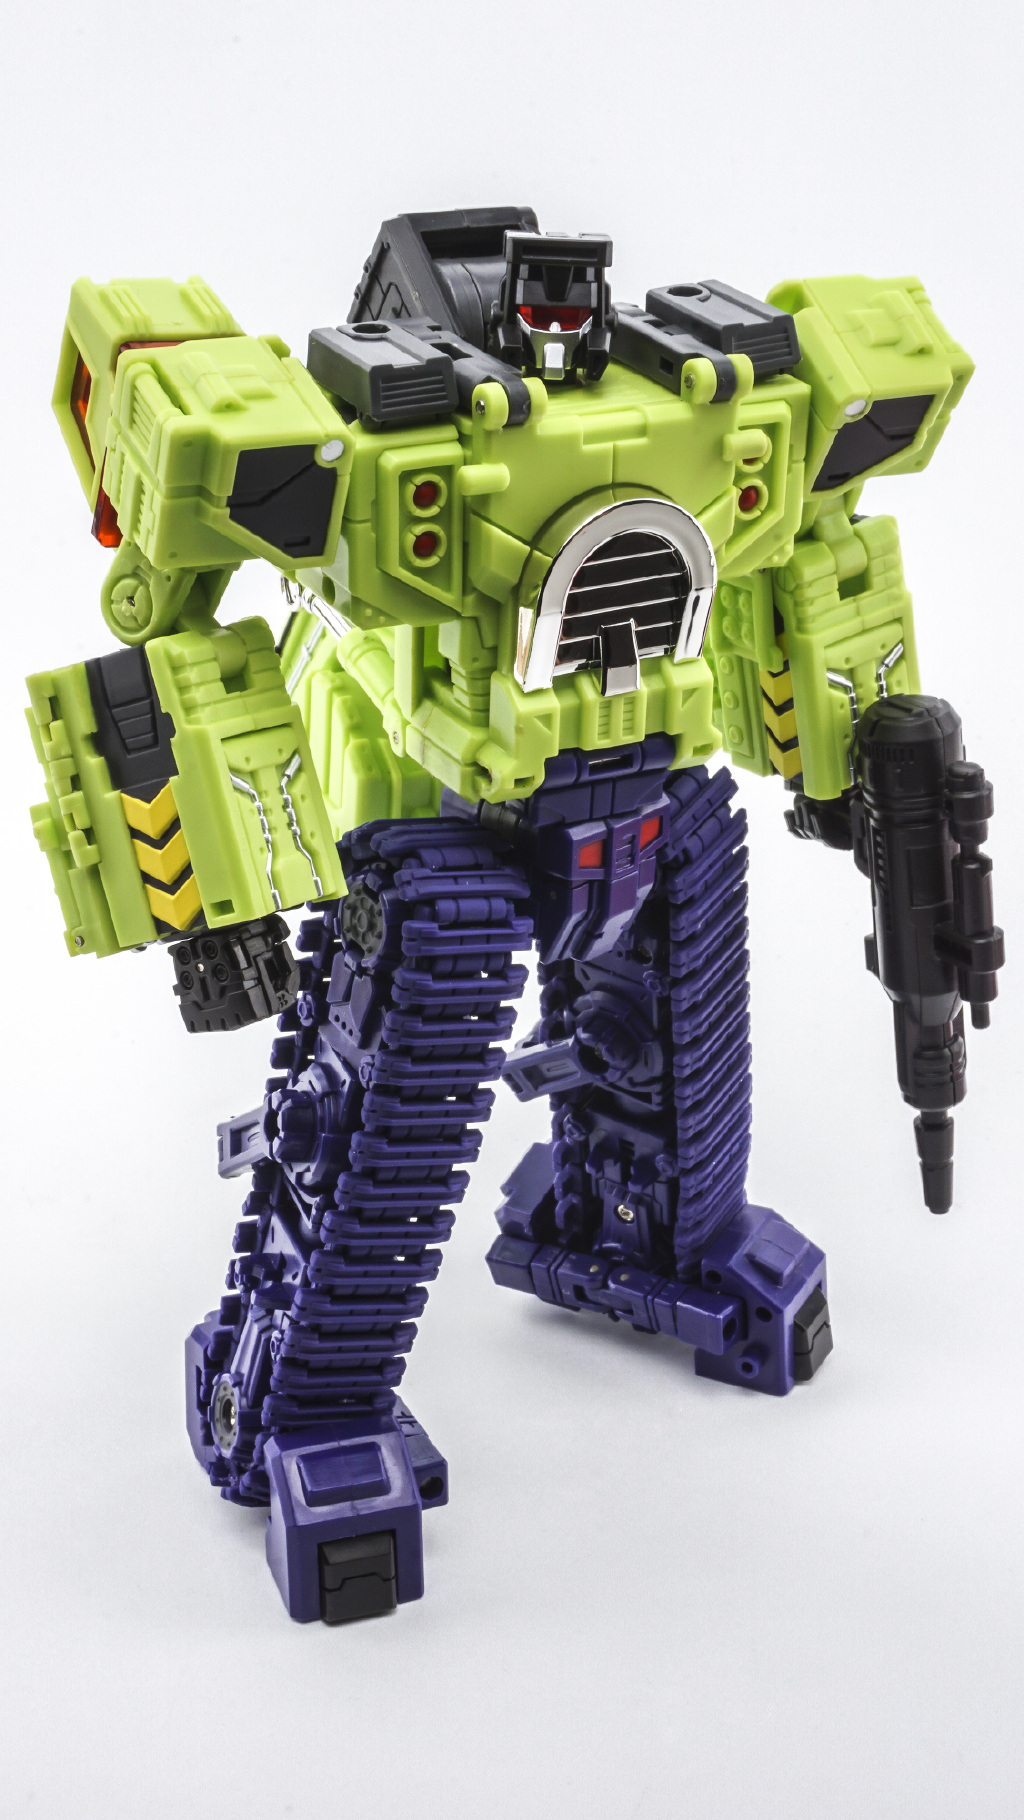 Unearth in robot mode